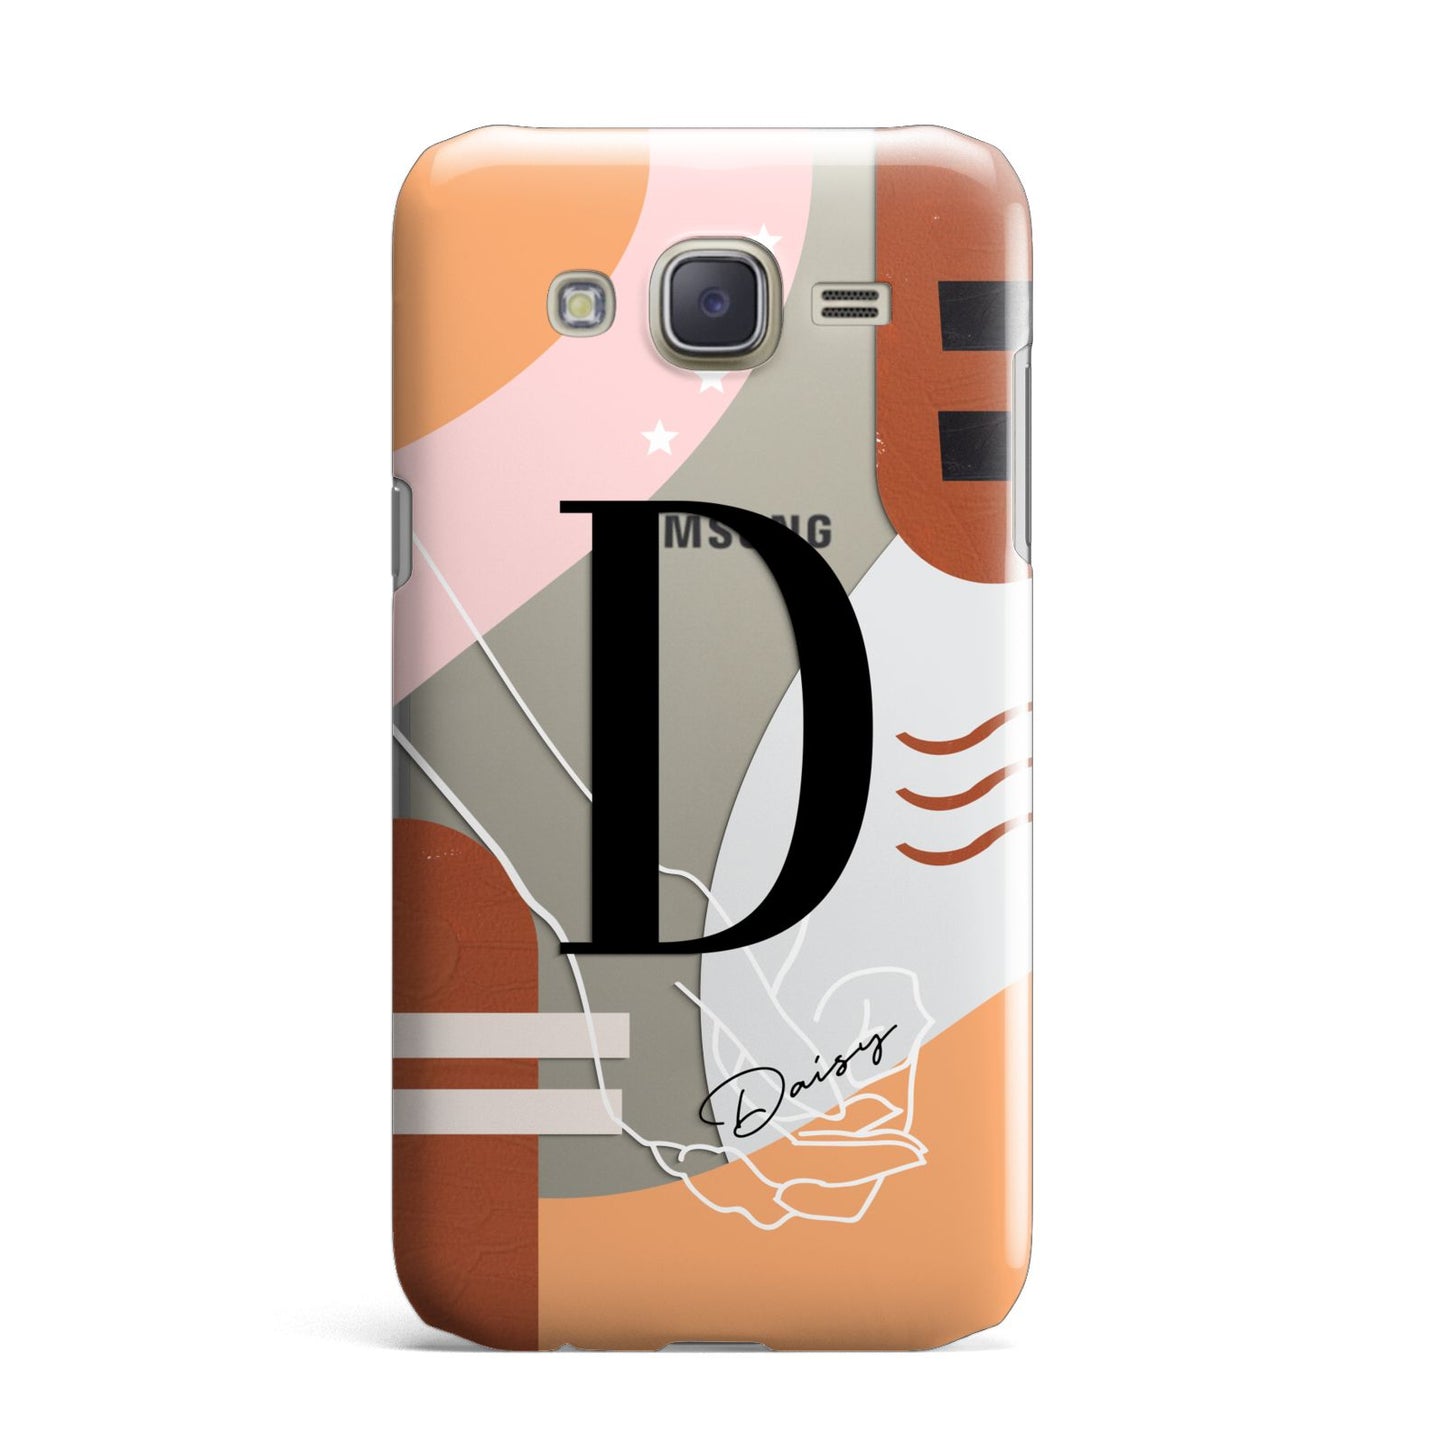 Personalised Abstract Samsung Galaxy J7 Case